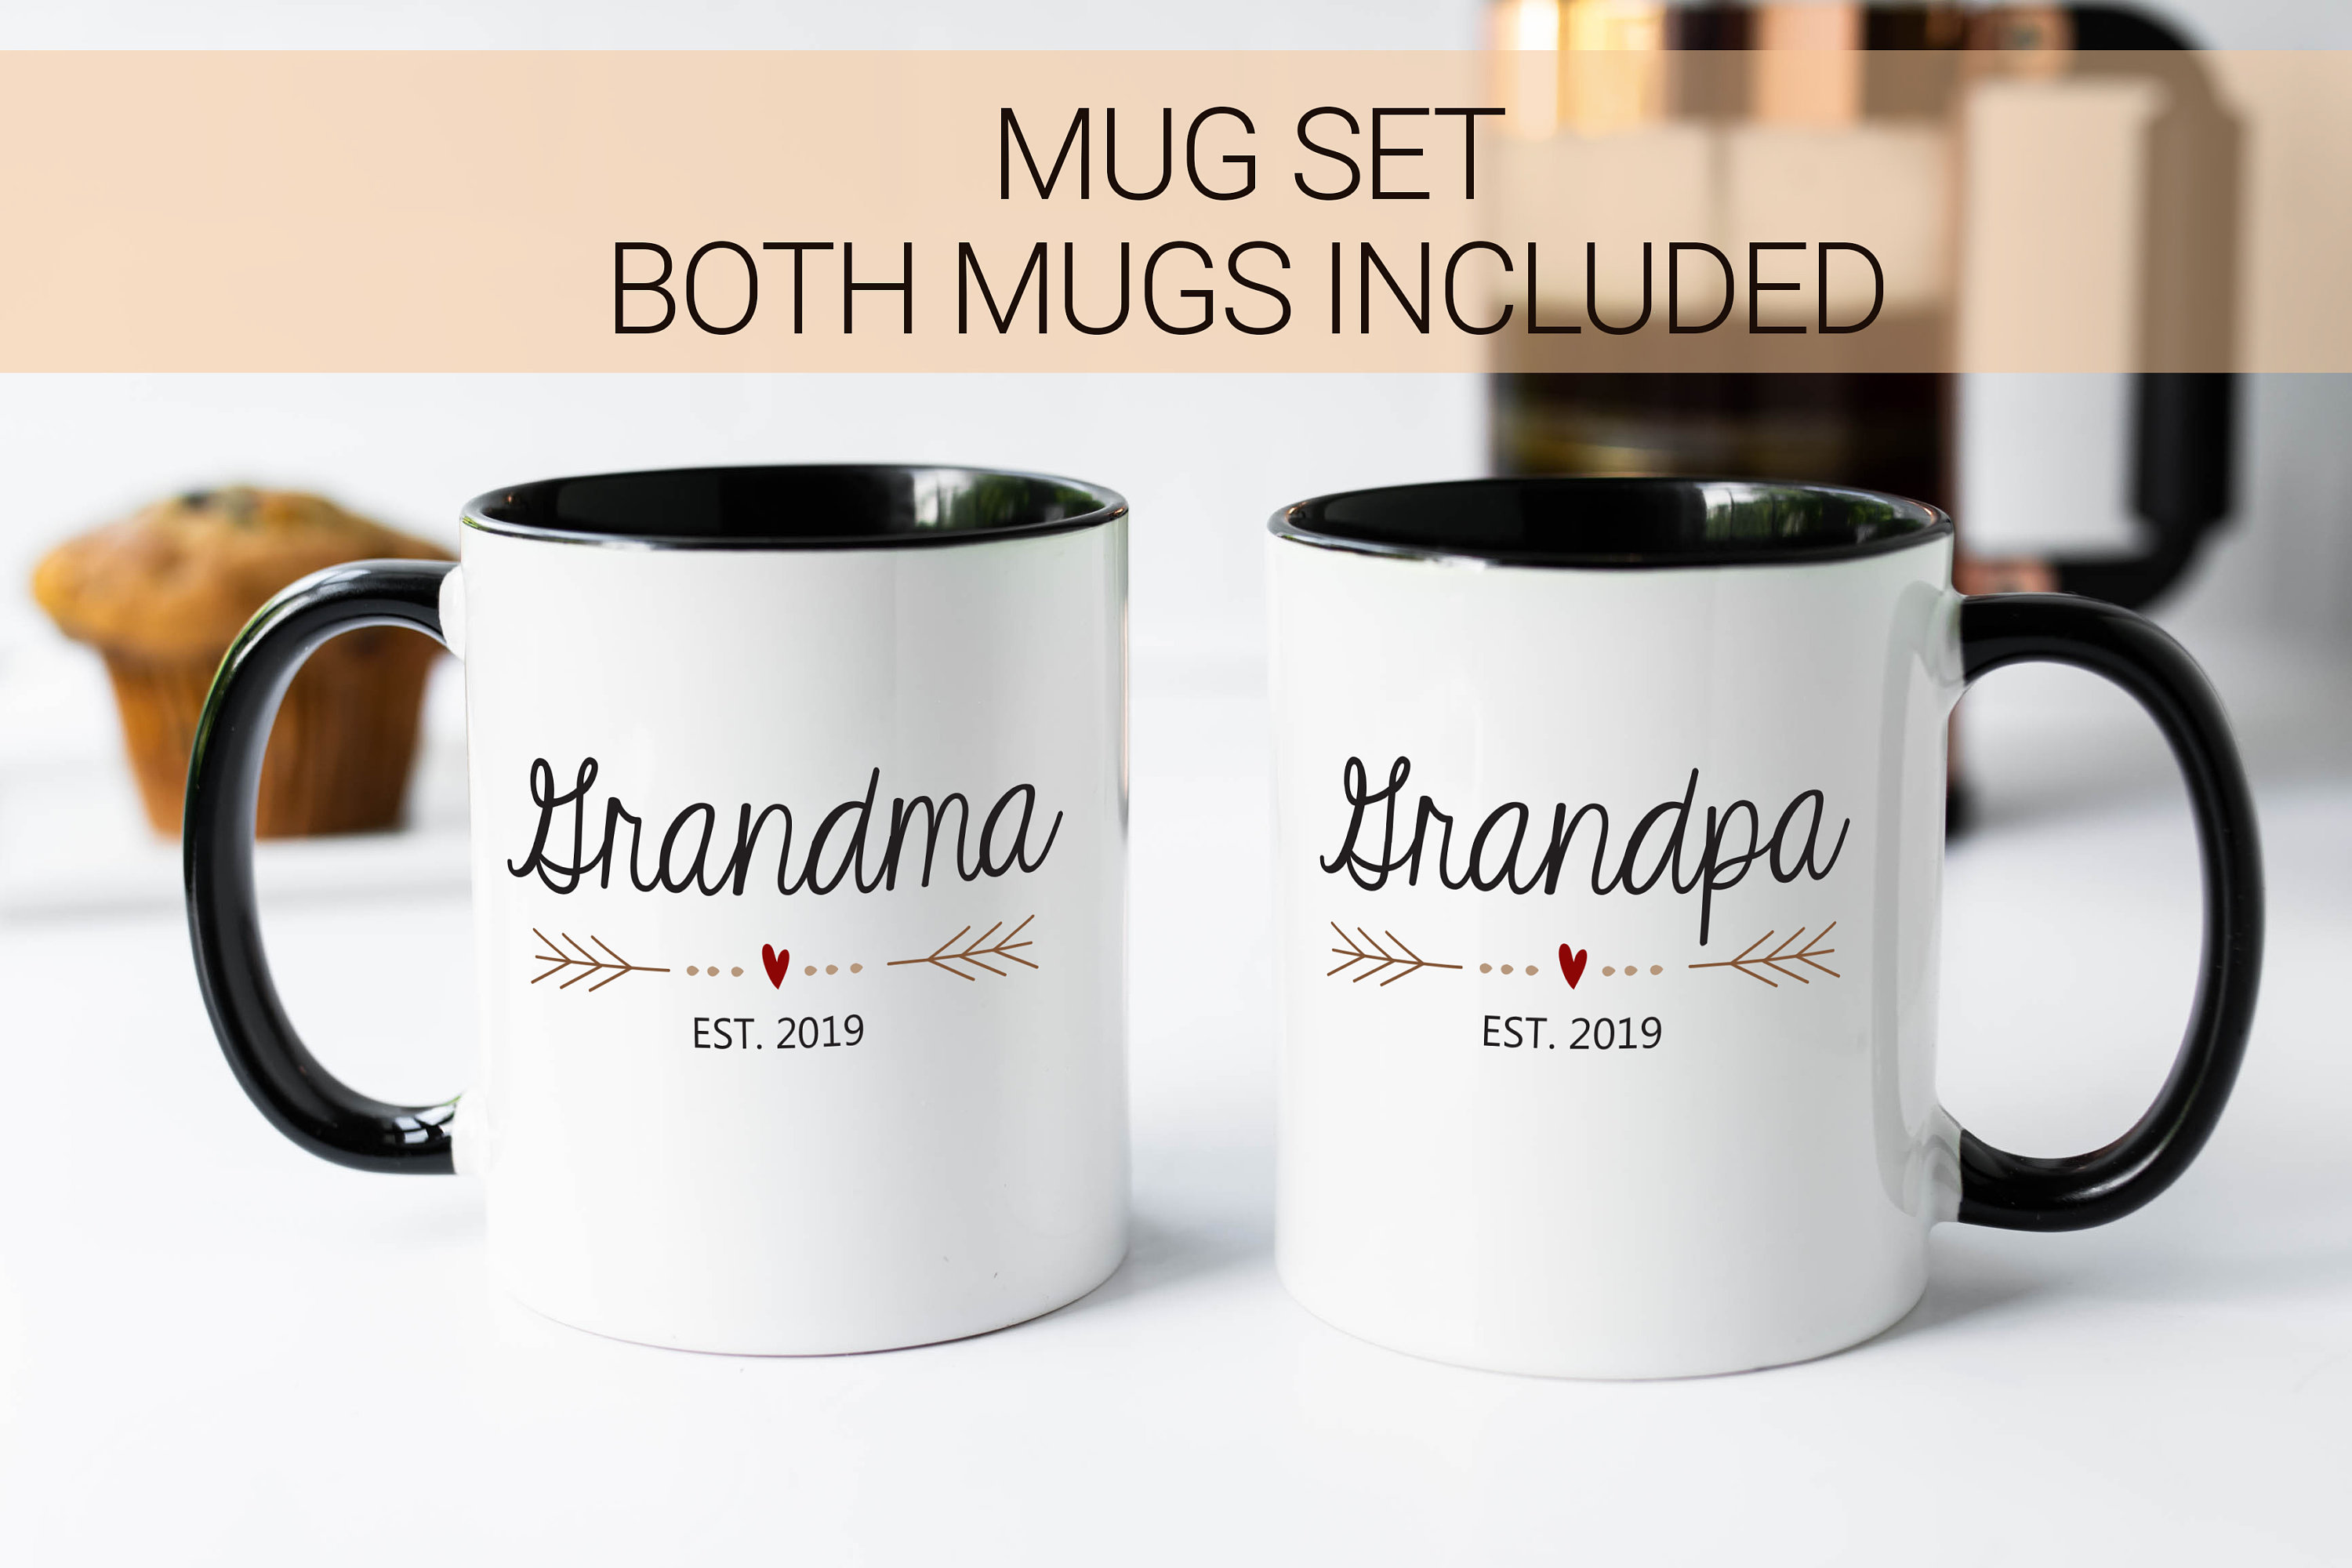 Pregnancy Announcement New Grandparent Gifts for Grandparents Coffee Mugs Set Grandma and Grandpa Mugs Personalized Grandparent Mugs Set